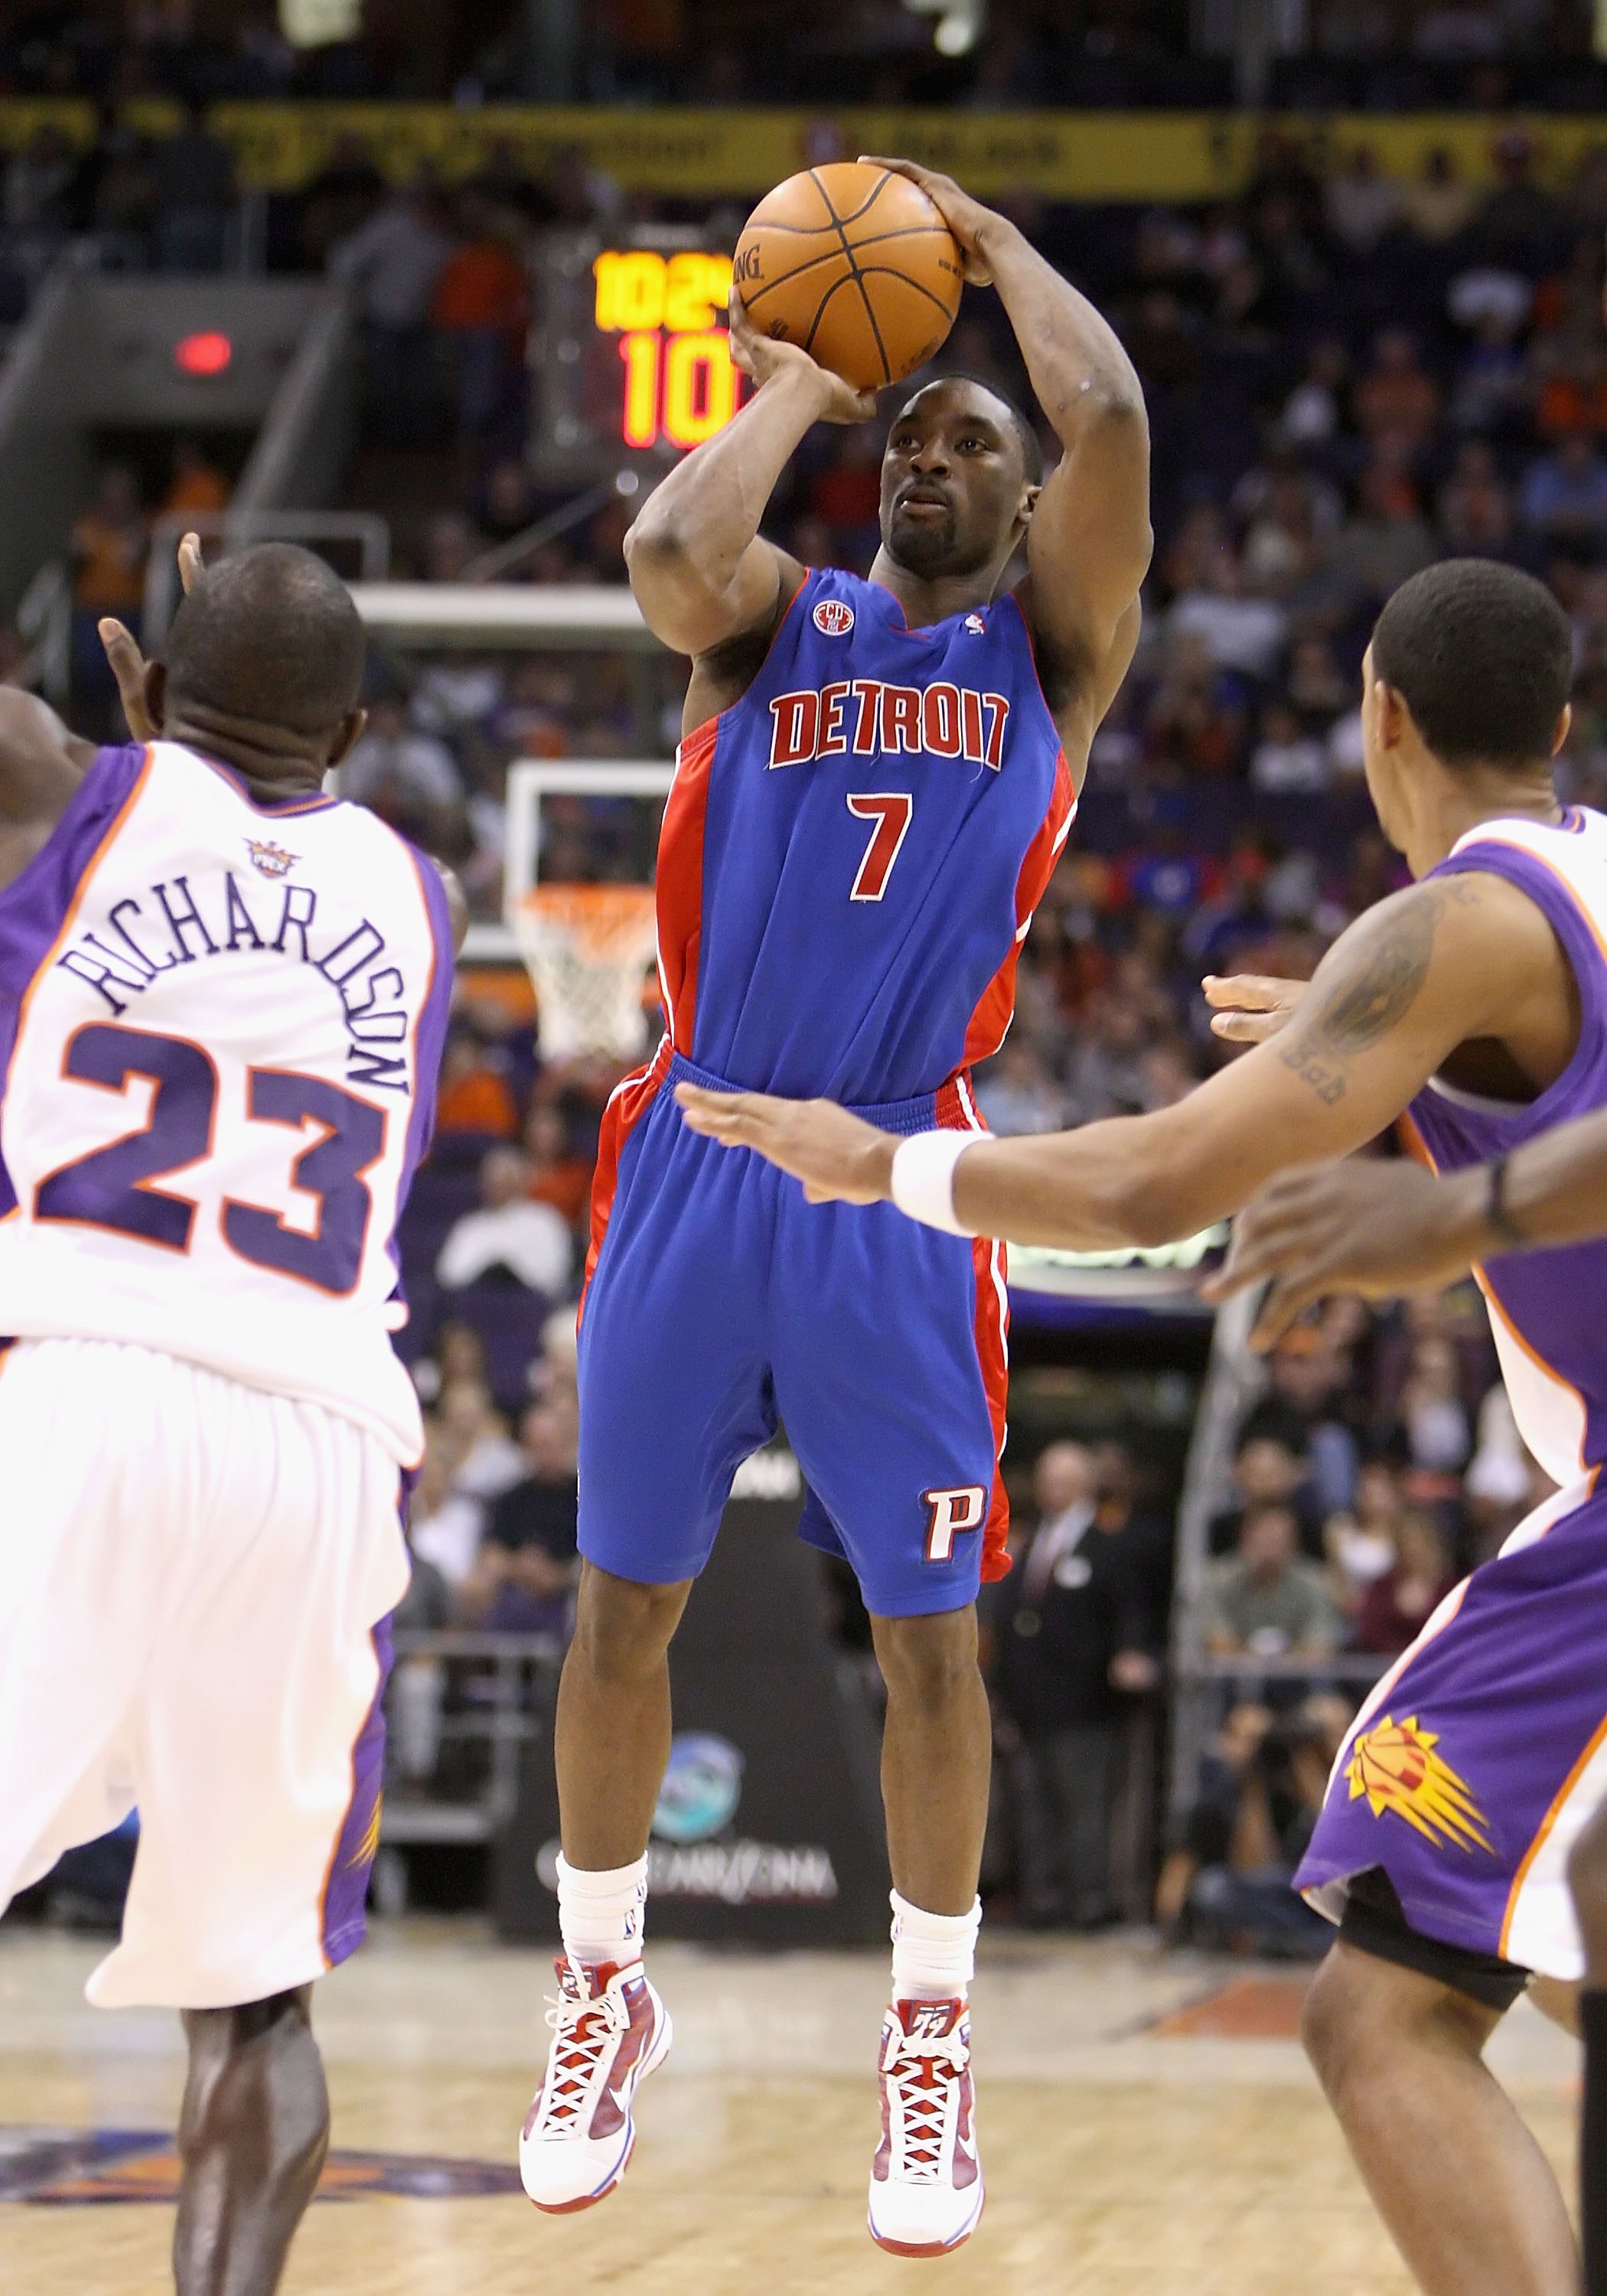 PHOENIX - NOVEMBER 22:  Ben Gordon #7 of the Detroit Pistons puts up a shot during the NBA game against the Phoenix Suns at US Airways Center on November 22, 2009 in Phoenix, Arizona. The Suns defeated the Pistons 117-91.  NOTE TO USER: User expressly ack